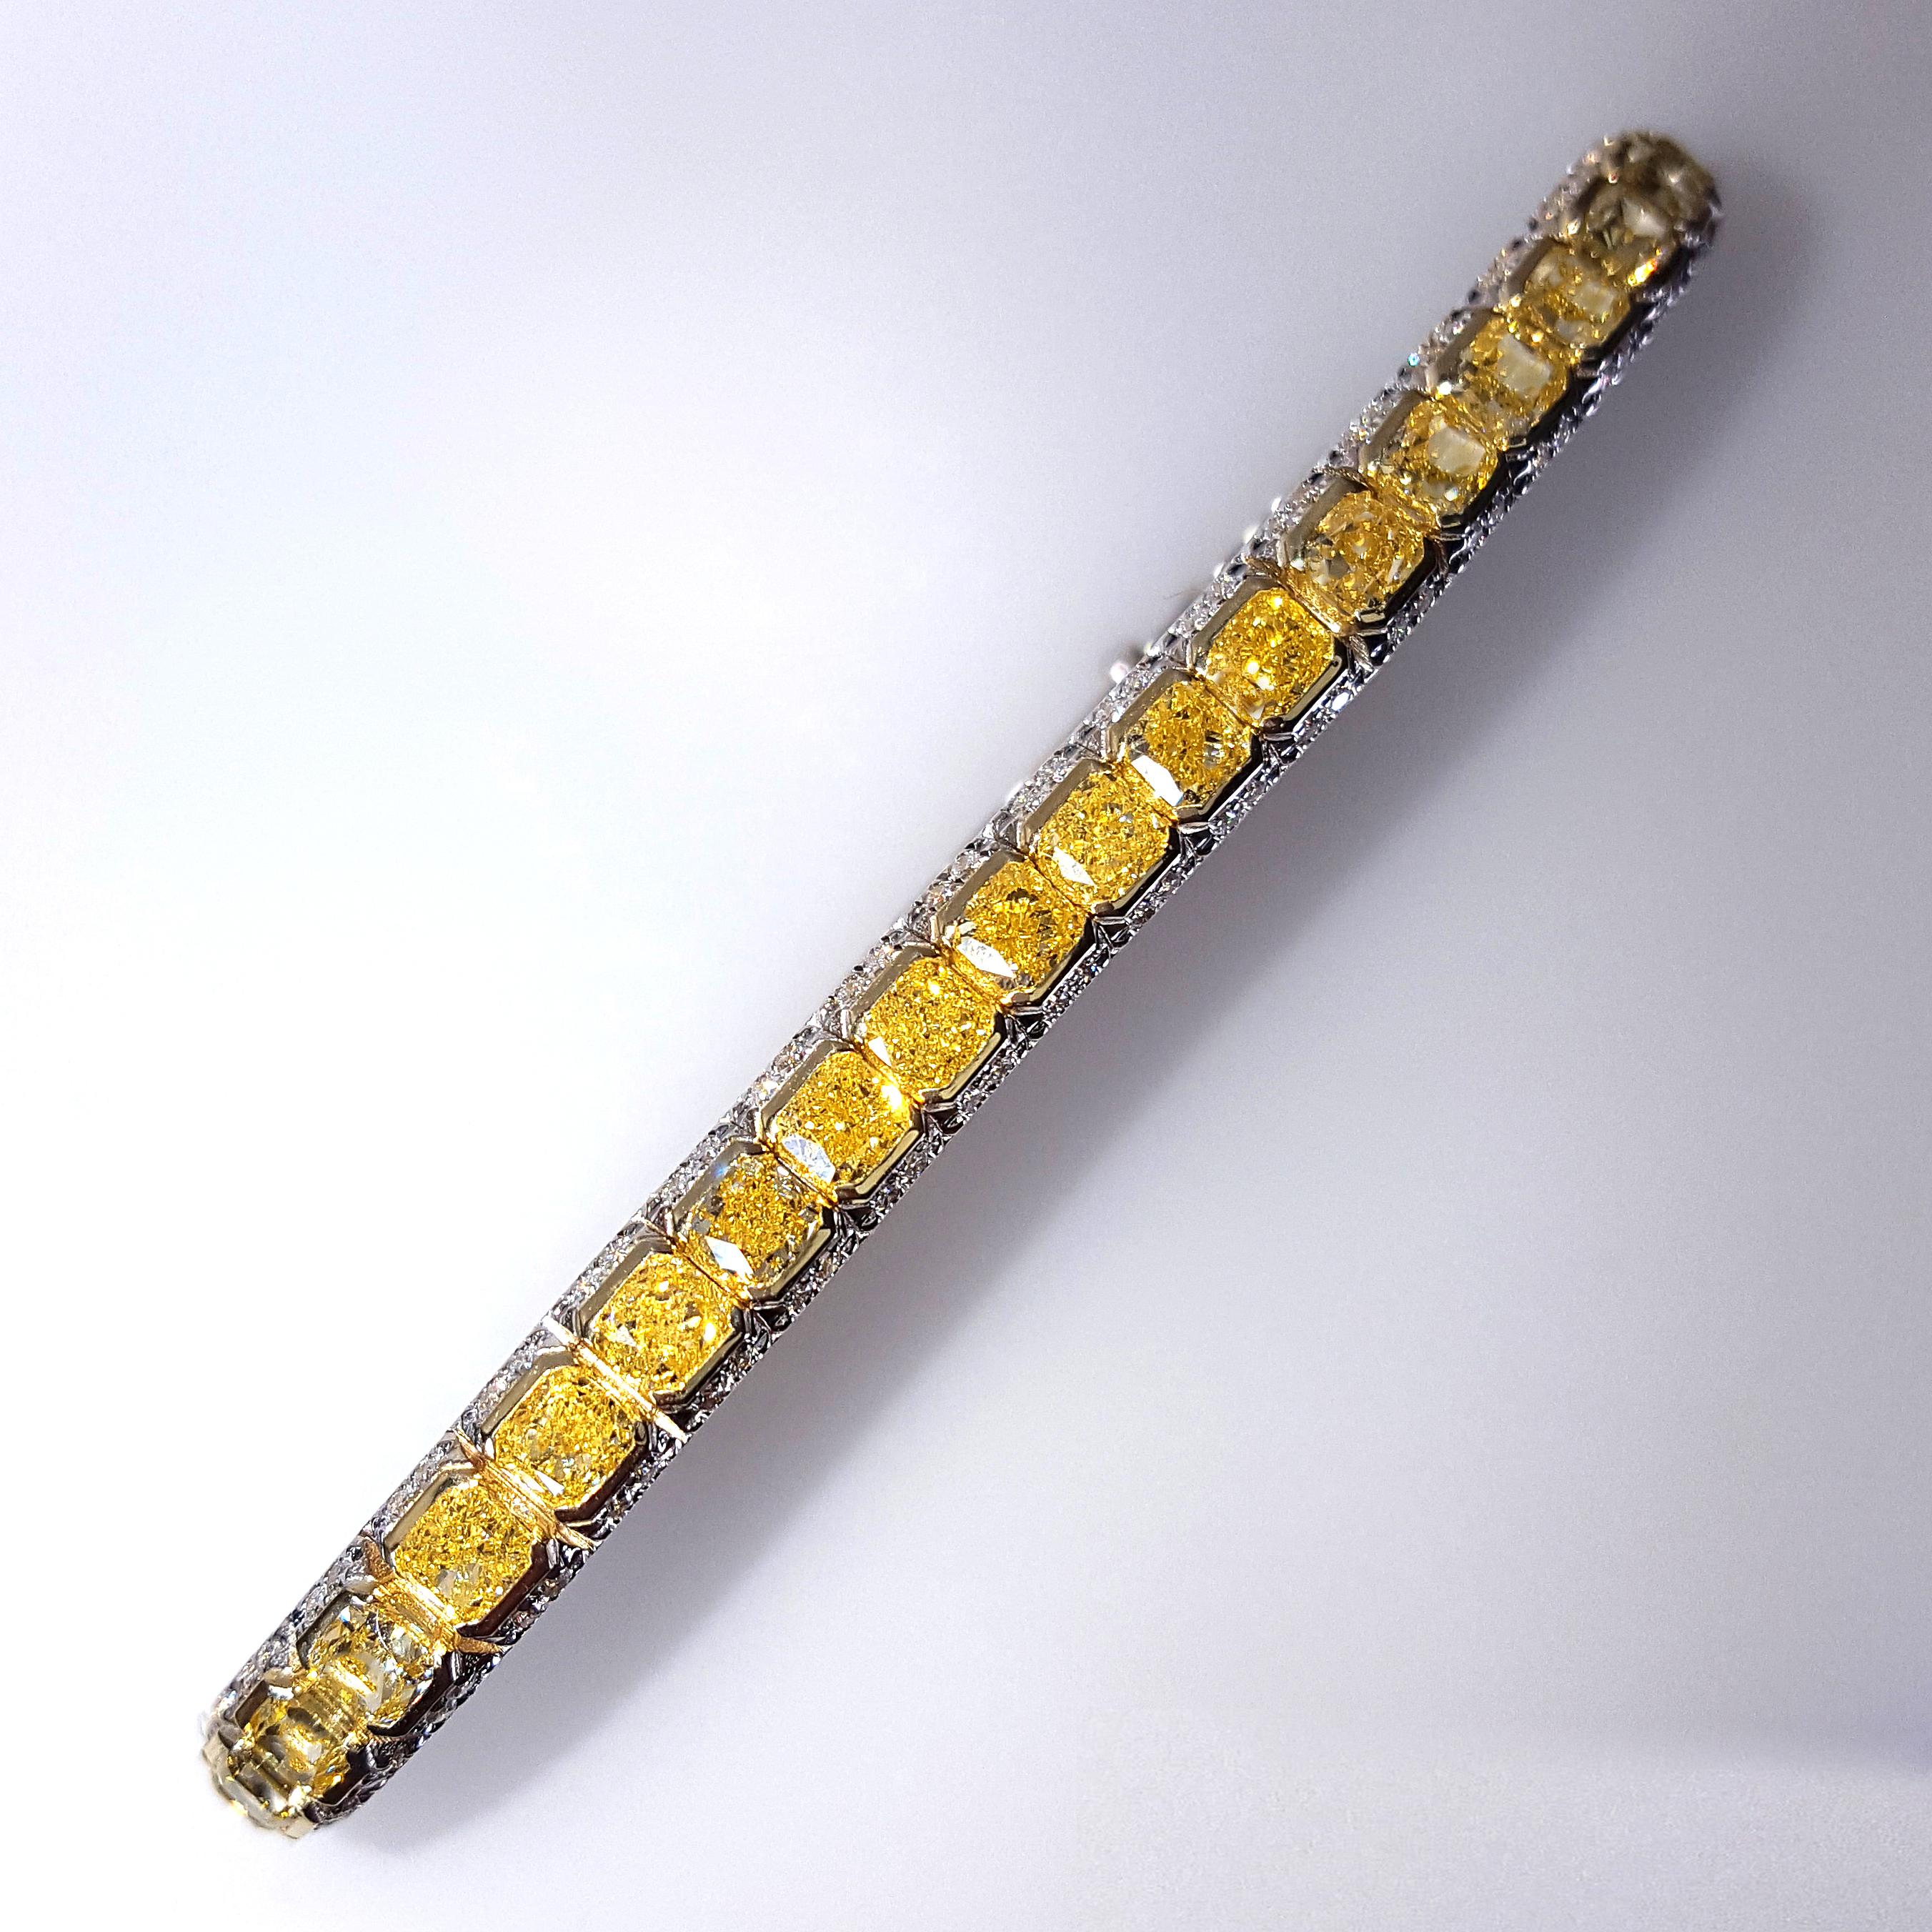 Cushion Cut Just Under 13 Carat Yellow and White Diamond Bracelet 18k White And Yellow Gold. For Sale